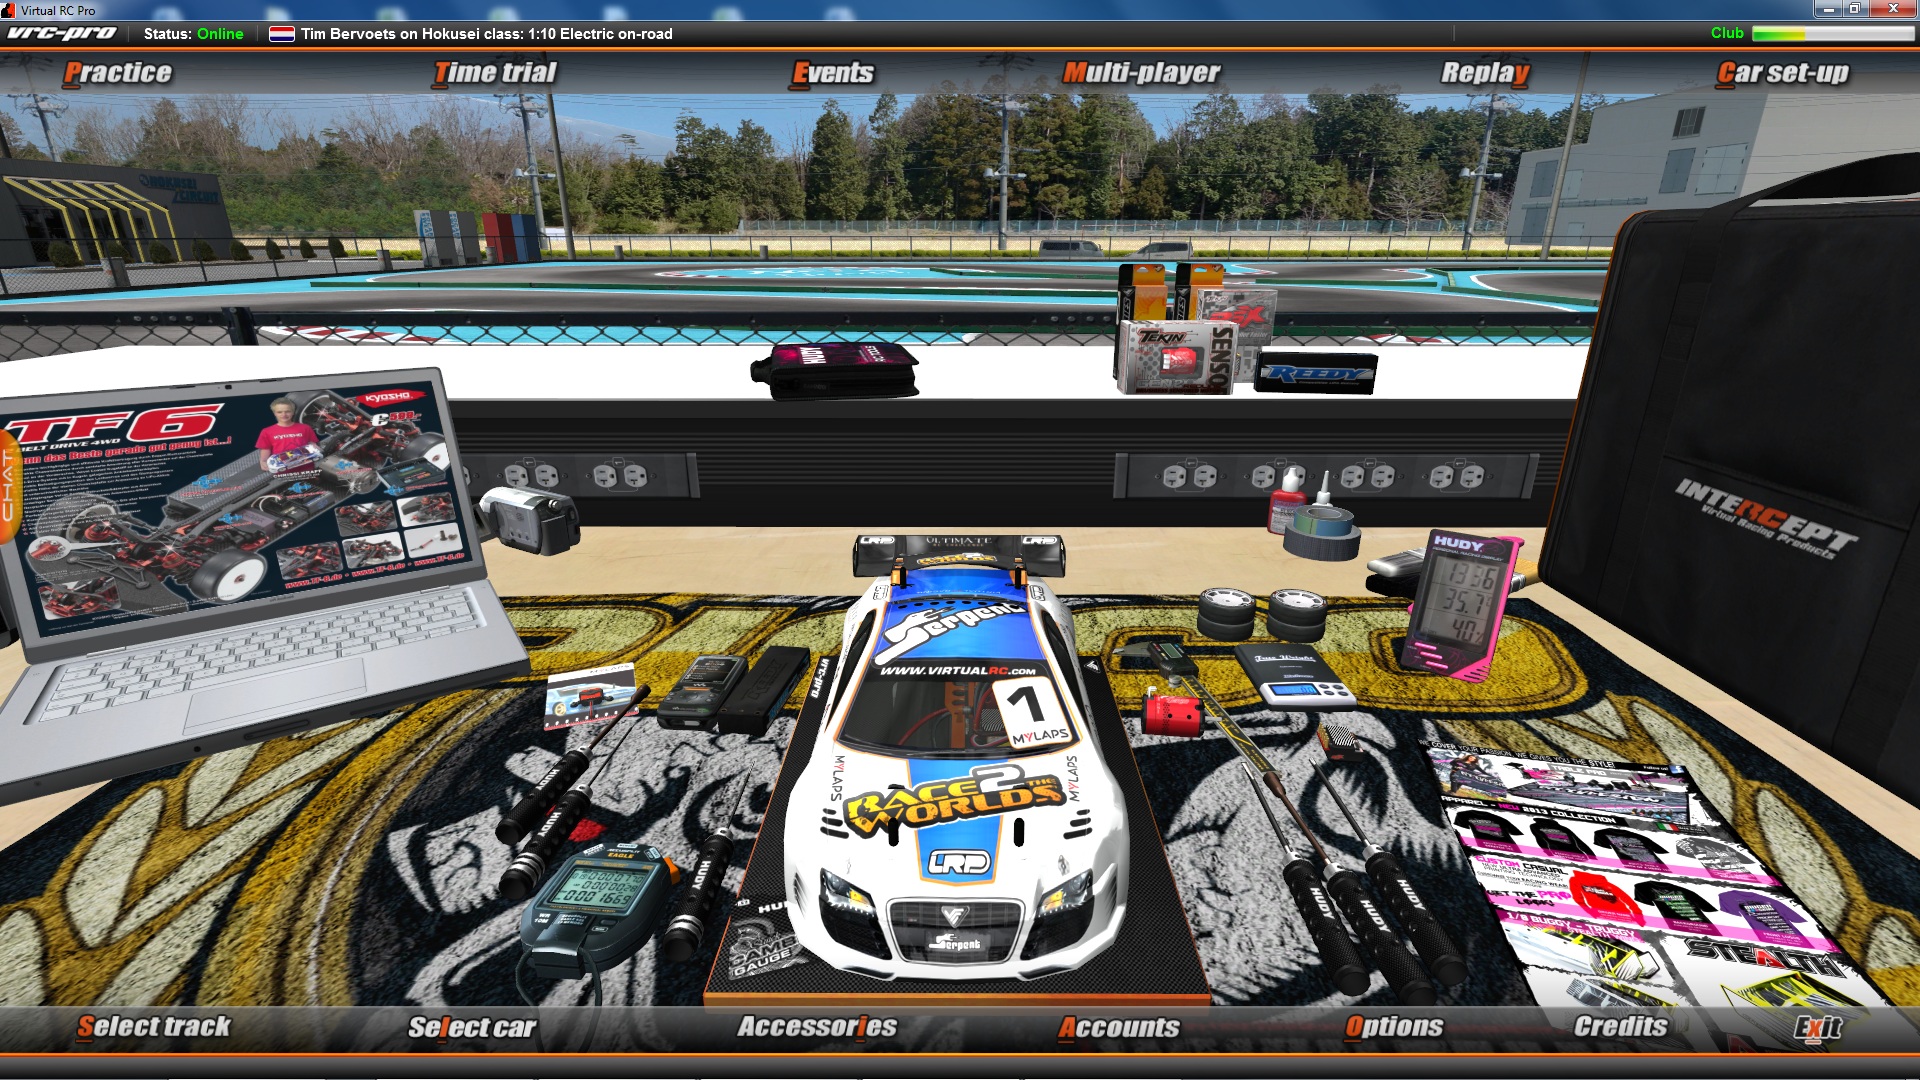 VRC PRO Deluxe Asia On-road tracks Featured Screenshot #1